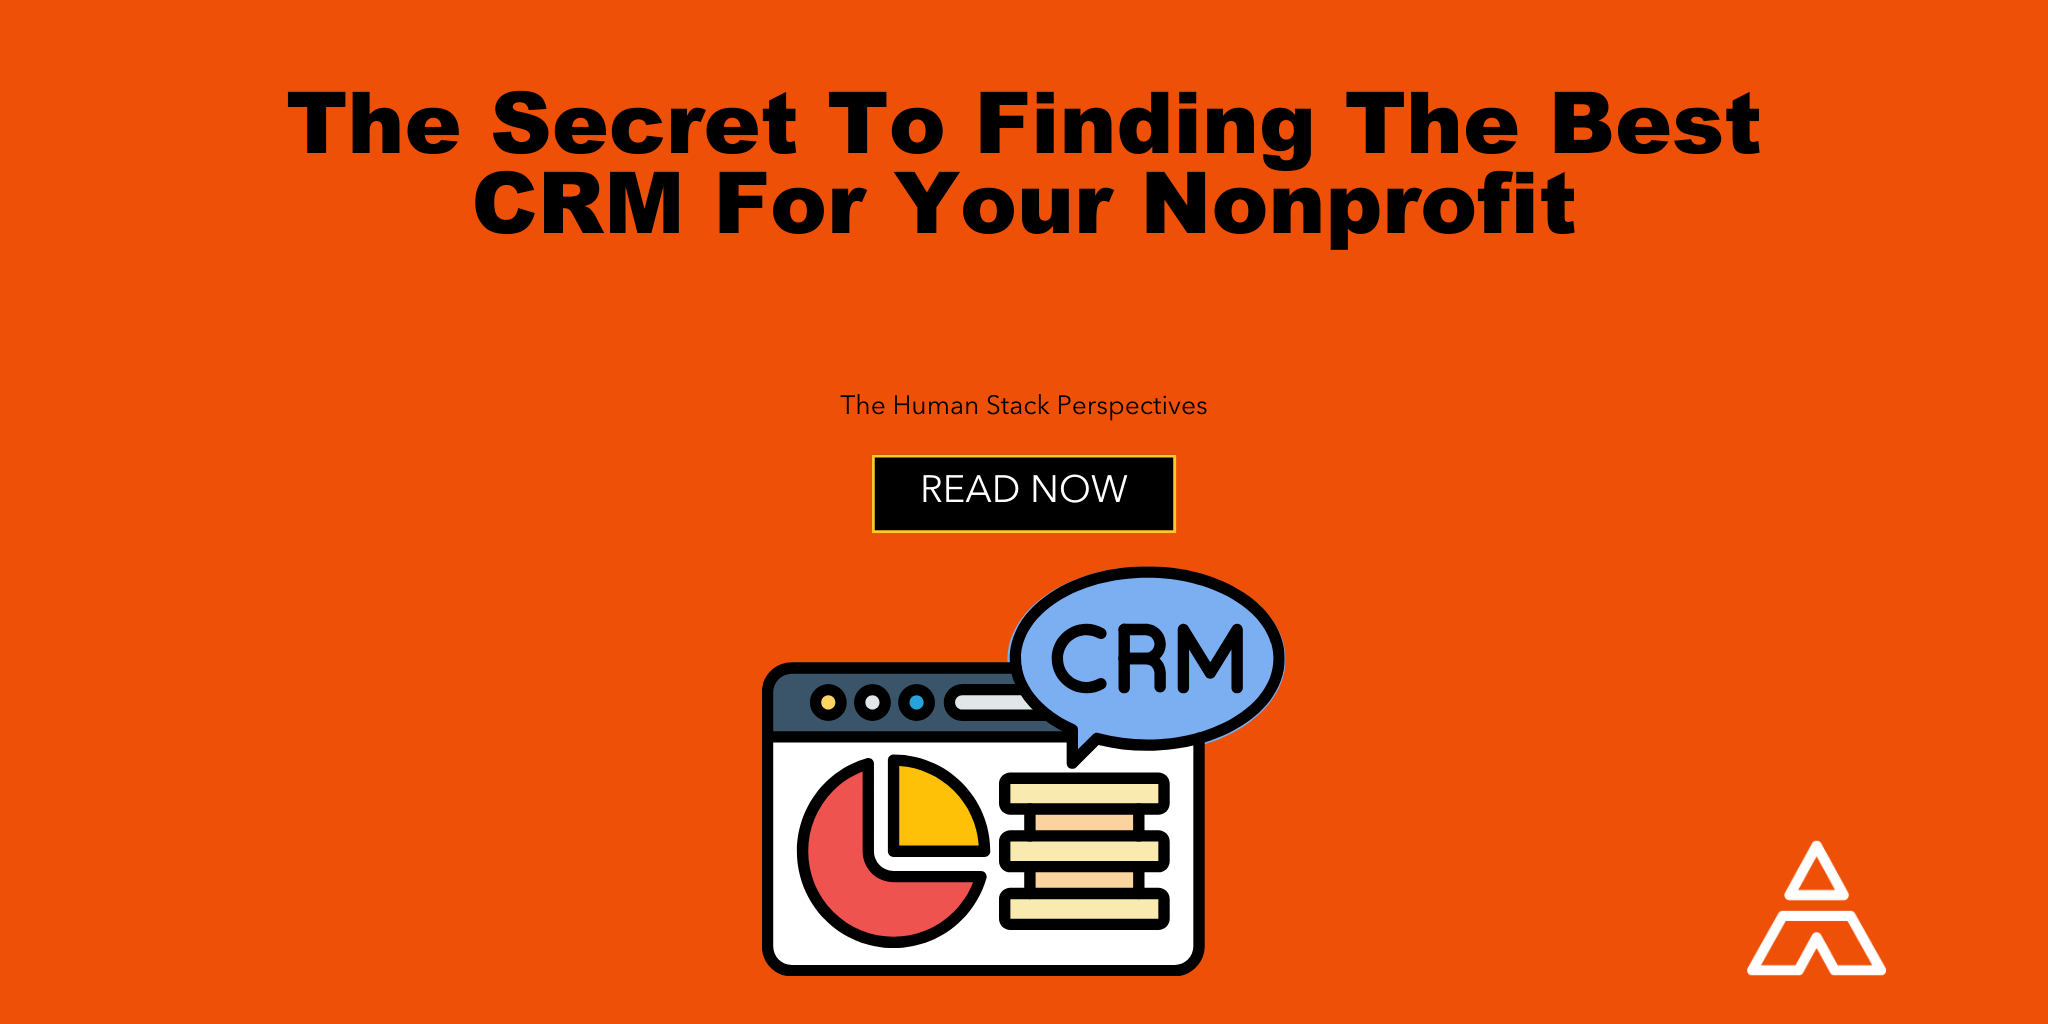 The Secret to Finding the Best CRM for Your Nonprofit